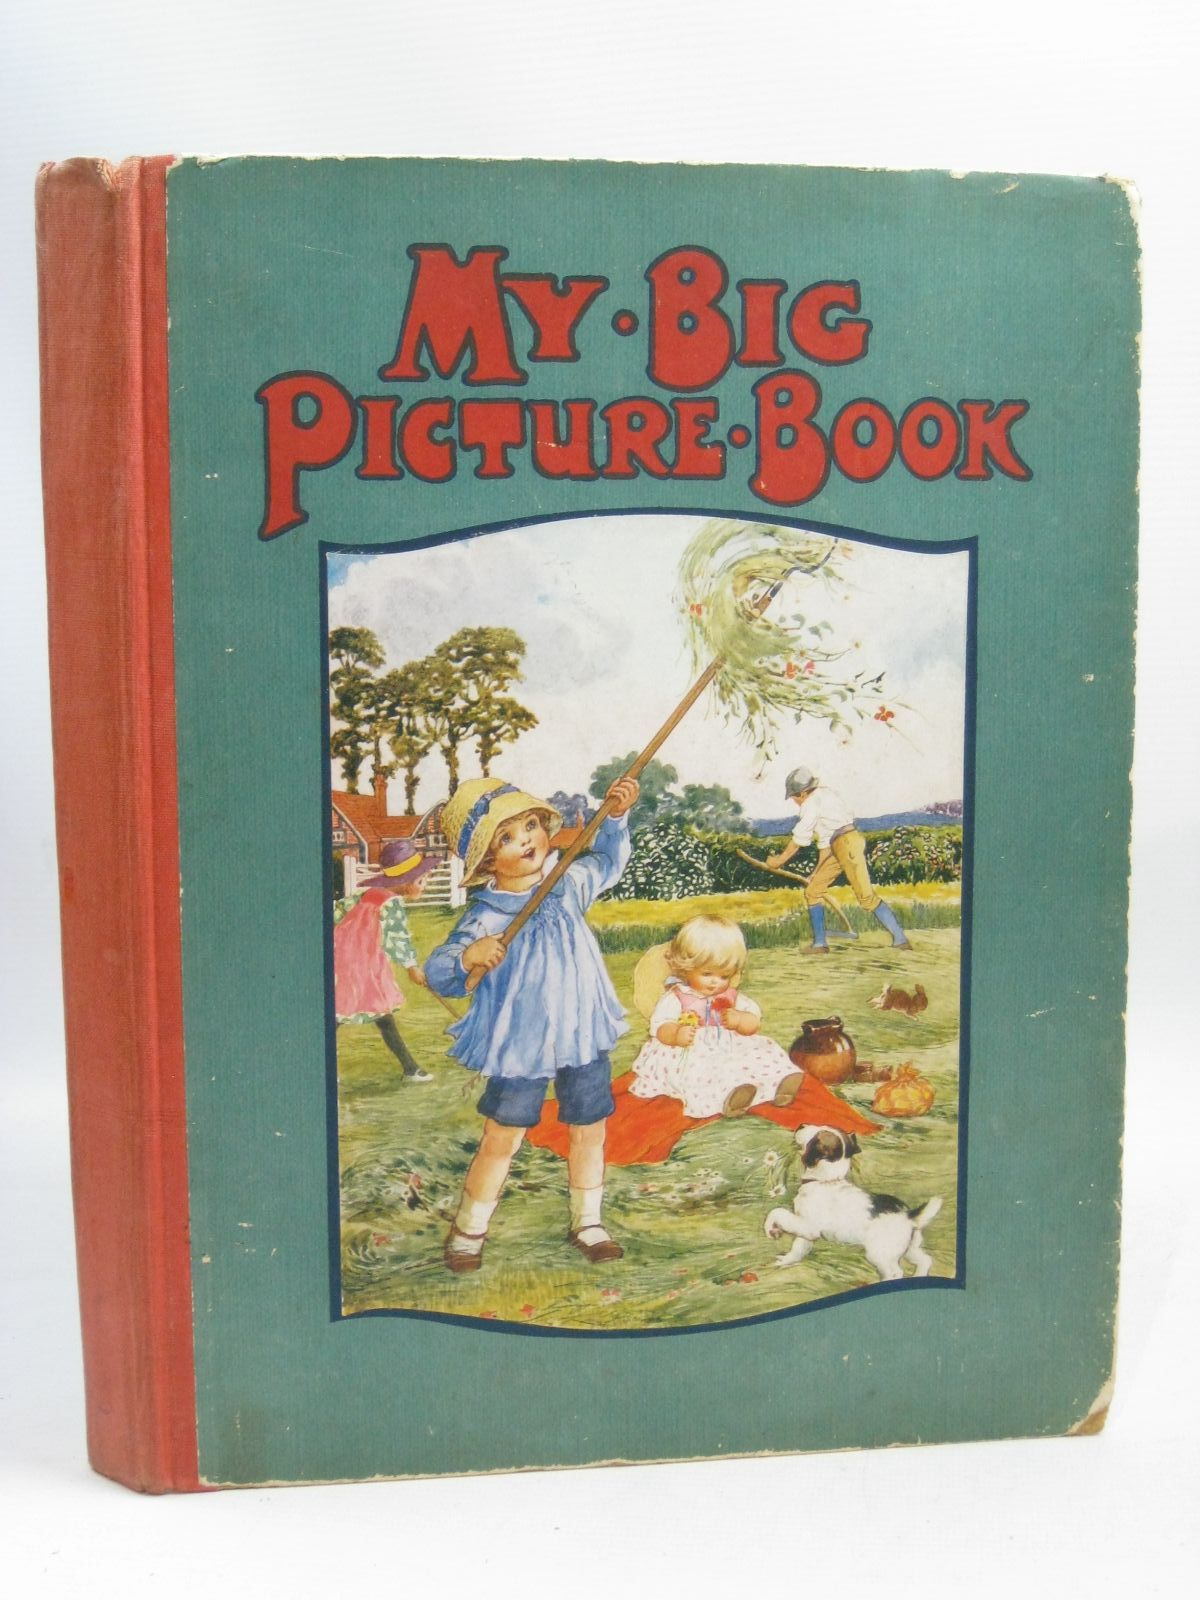 STRANG, MRS. HERBERT ILLUSTRATED BY SOWERBY, MILLICENT & GOVEY, LILIAN A. & REES, E. DOROTHY & ANDERSON, ANNE & ET AL., - My Big Picture Book